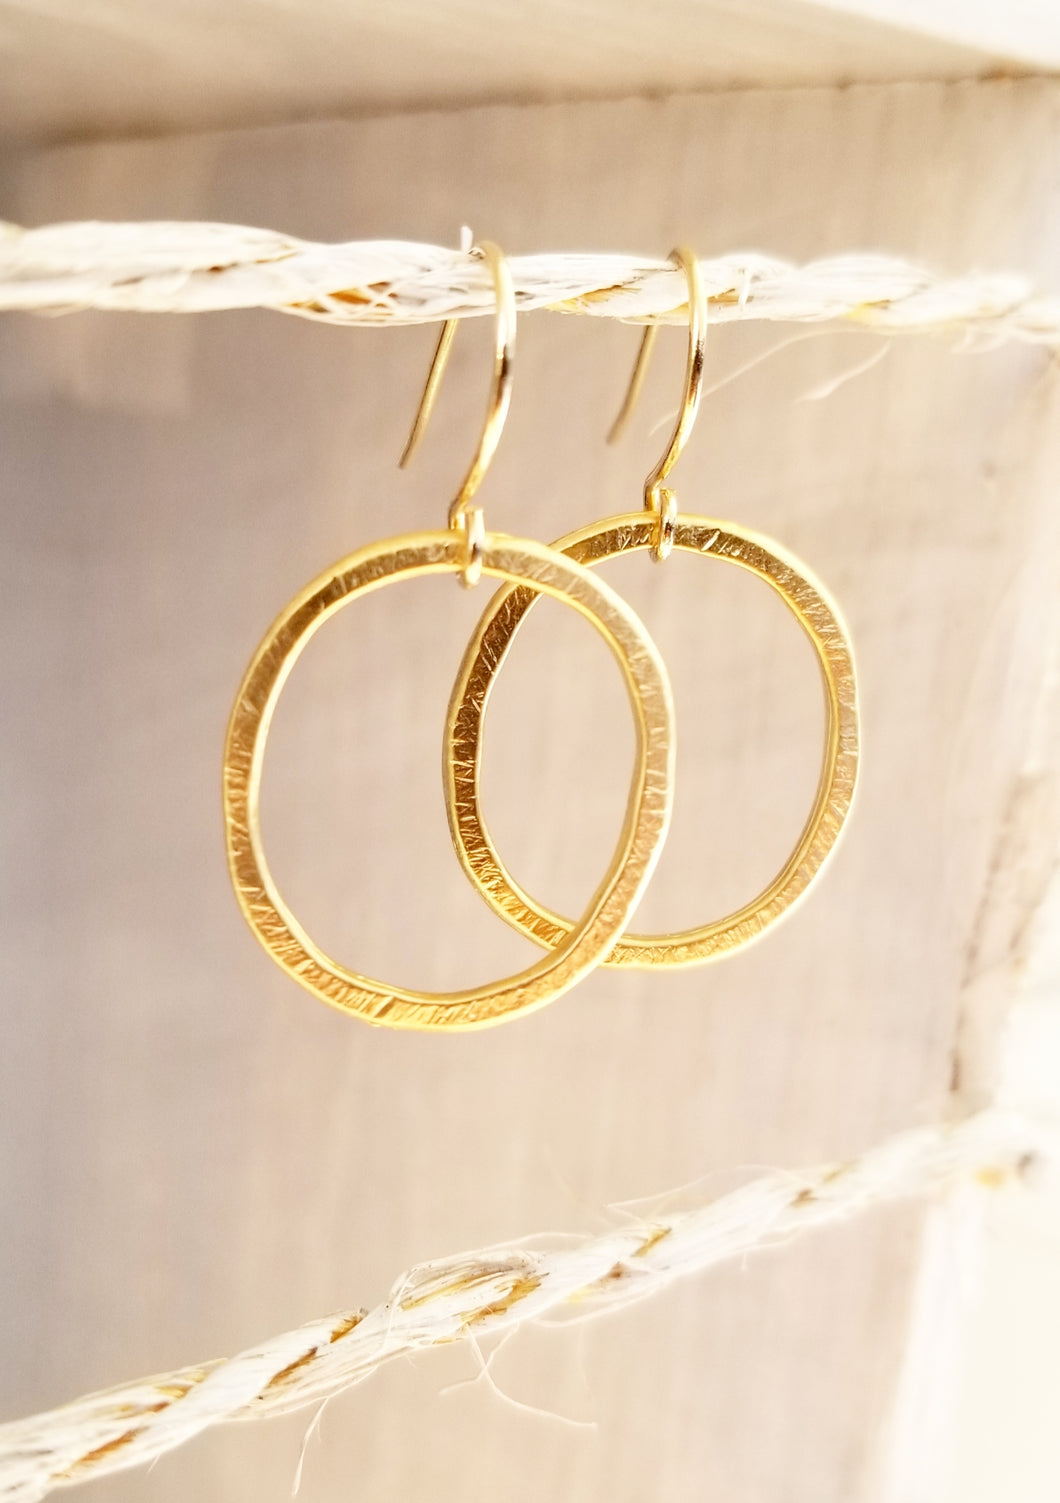 Brushed gold earring